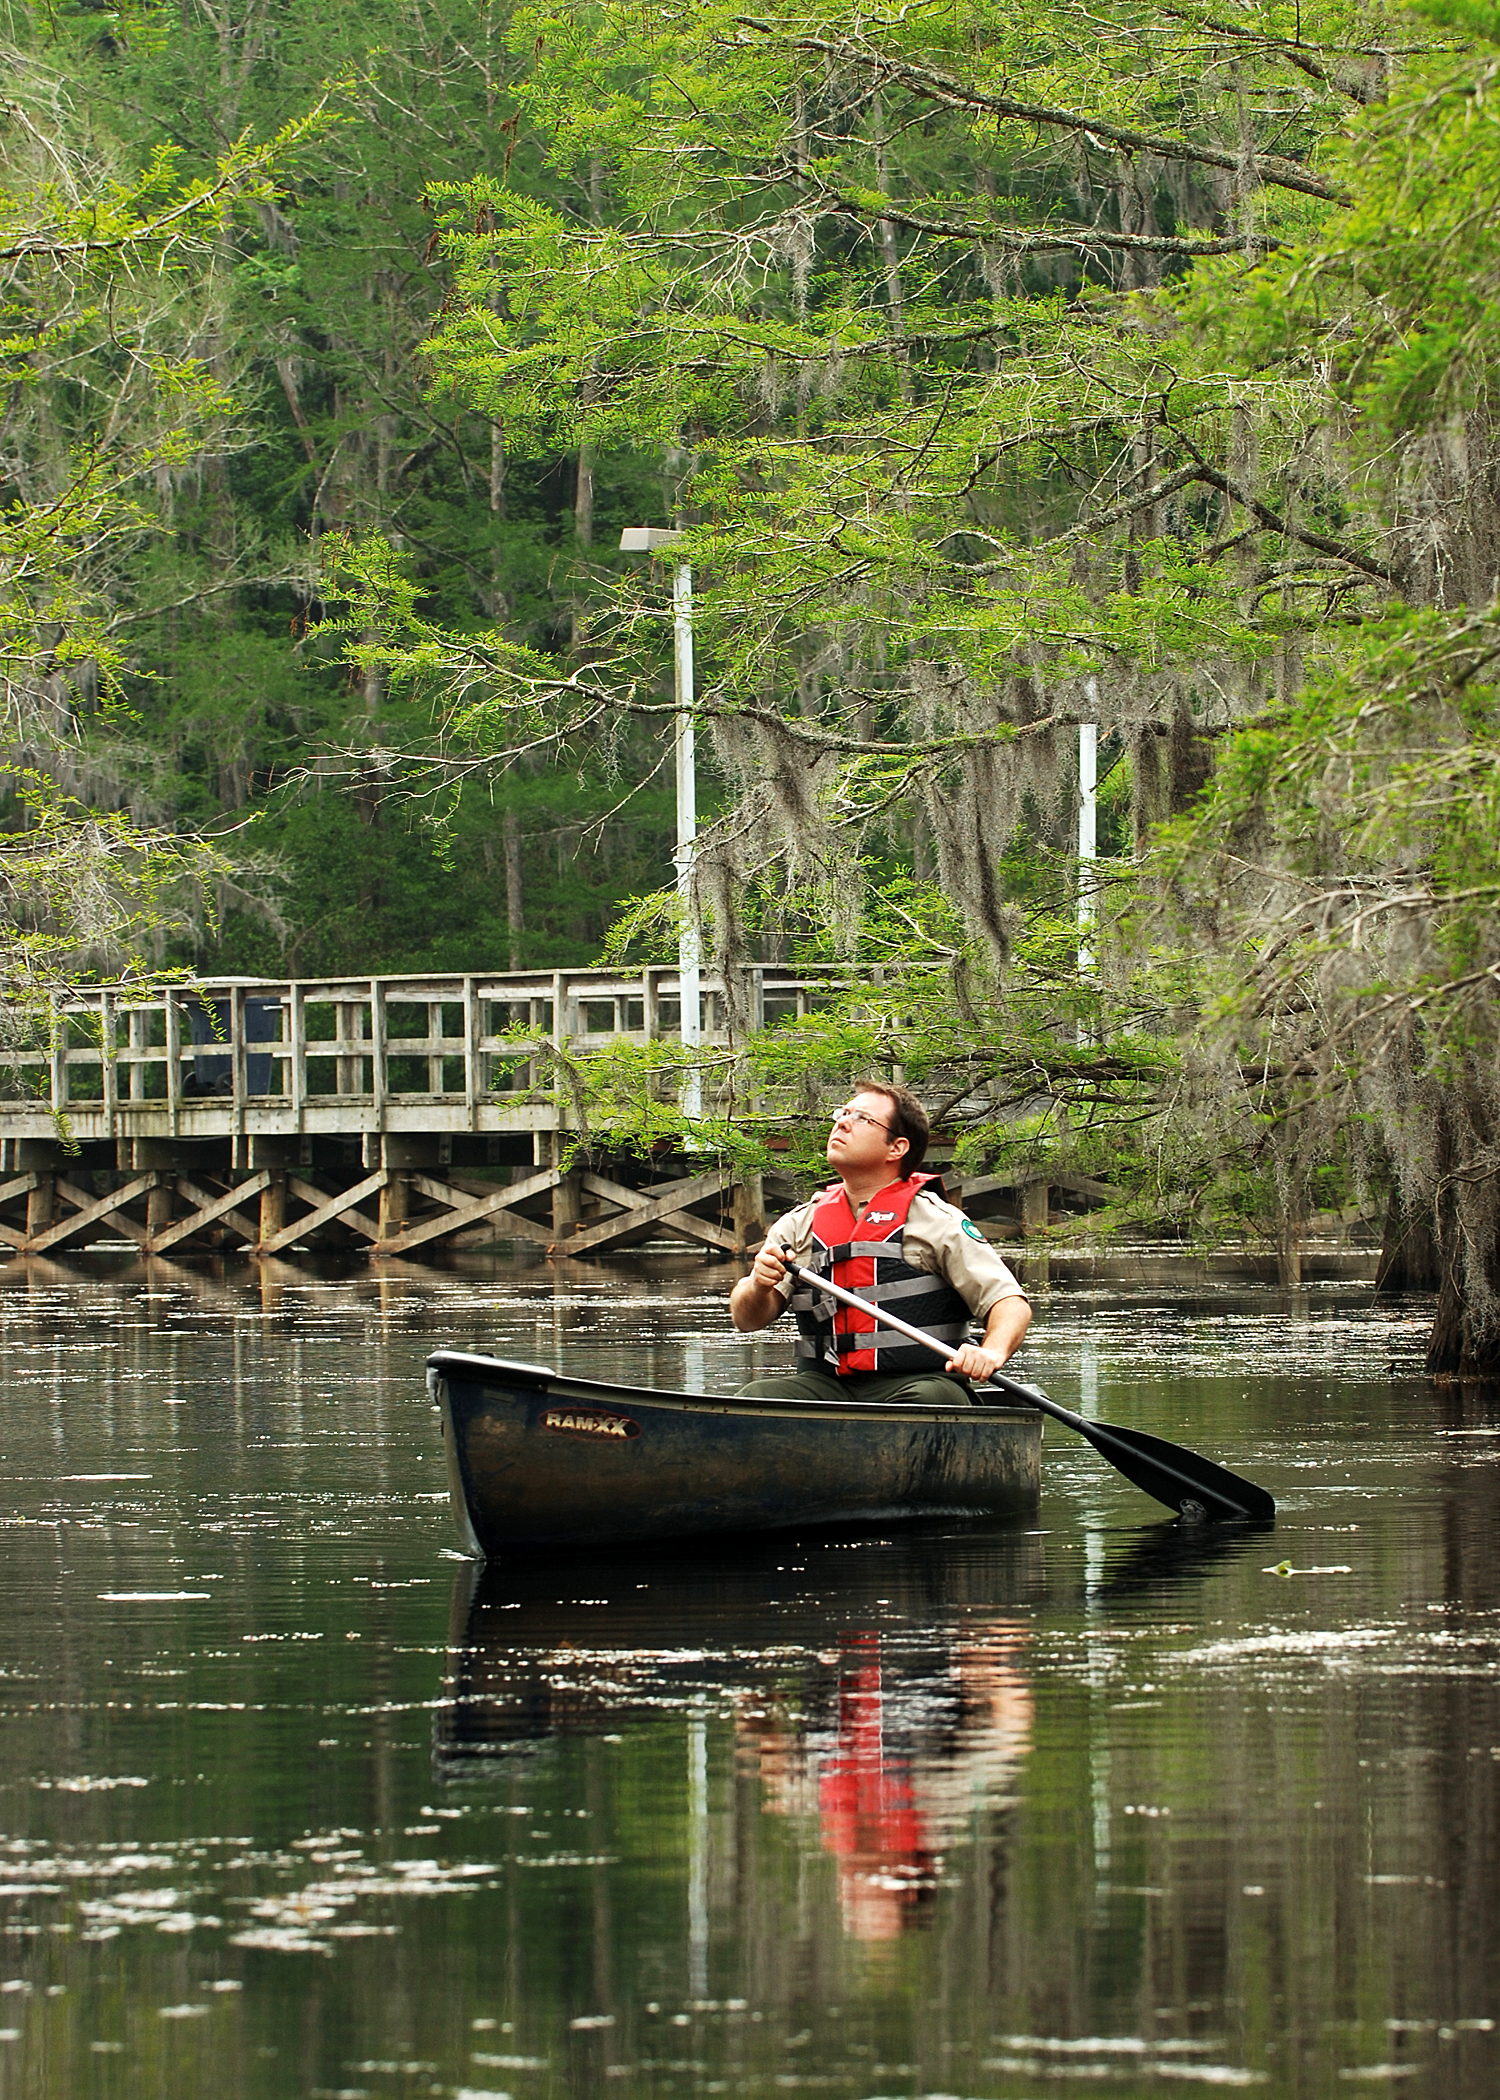 Paddling Caddo Lake, image by Chase Fountain TPWD